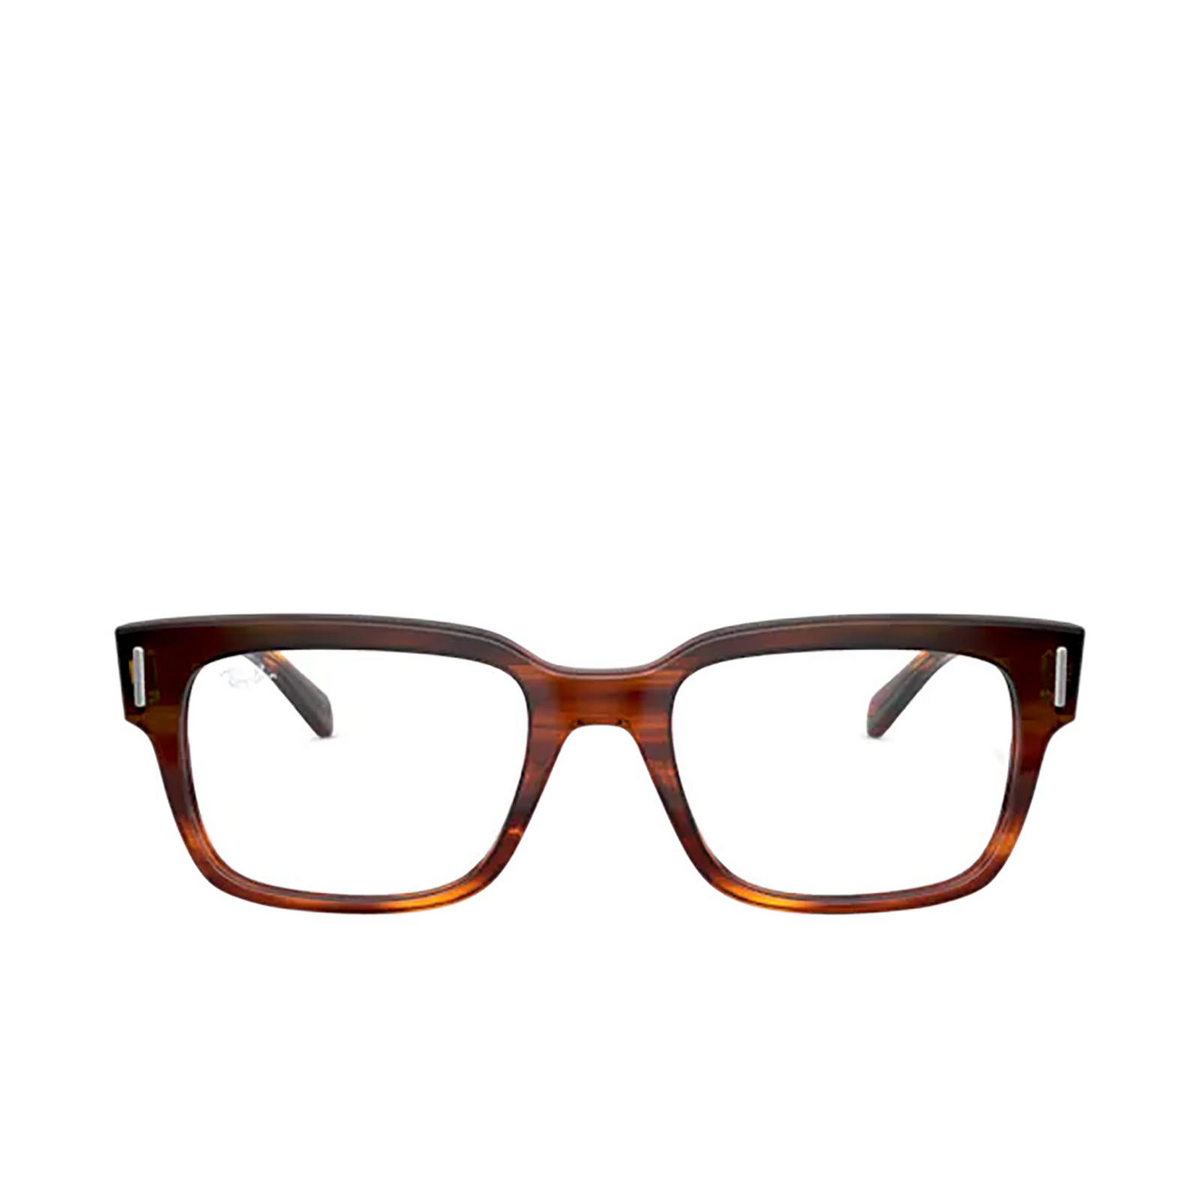 Ray-Ban RX5388 Eyeglasses 2144 STRIPED RED HAVANA - front view